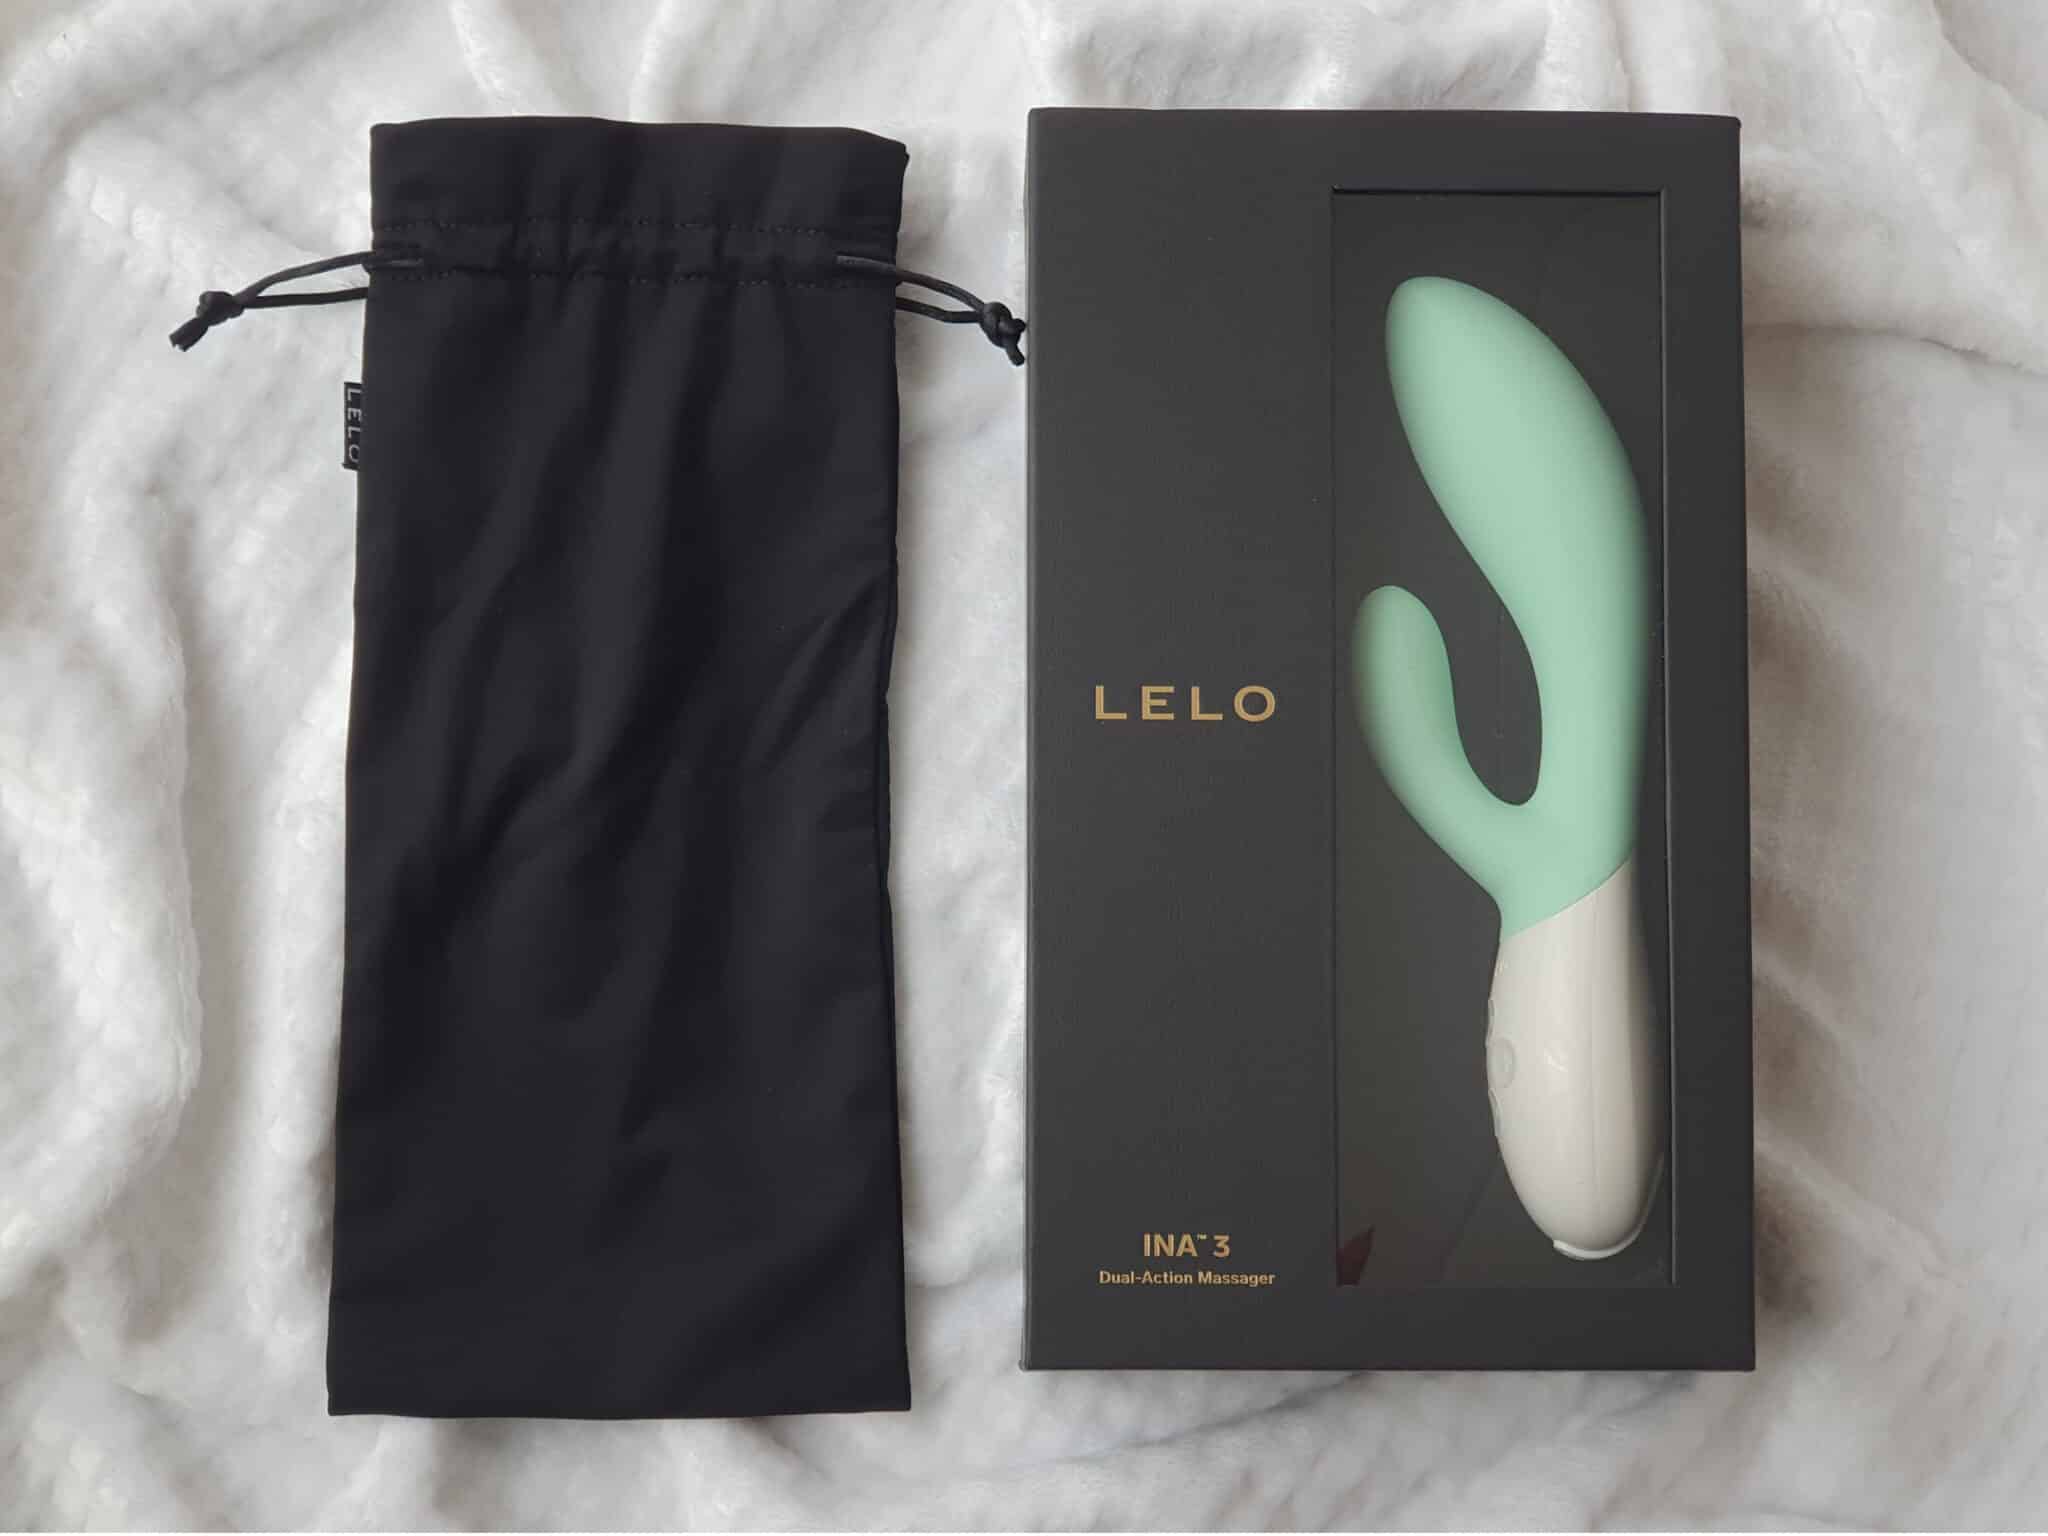 Lelo Ina 3 Unwrapping Excitement: A Packaging Review